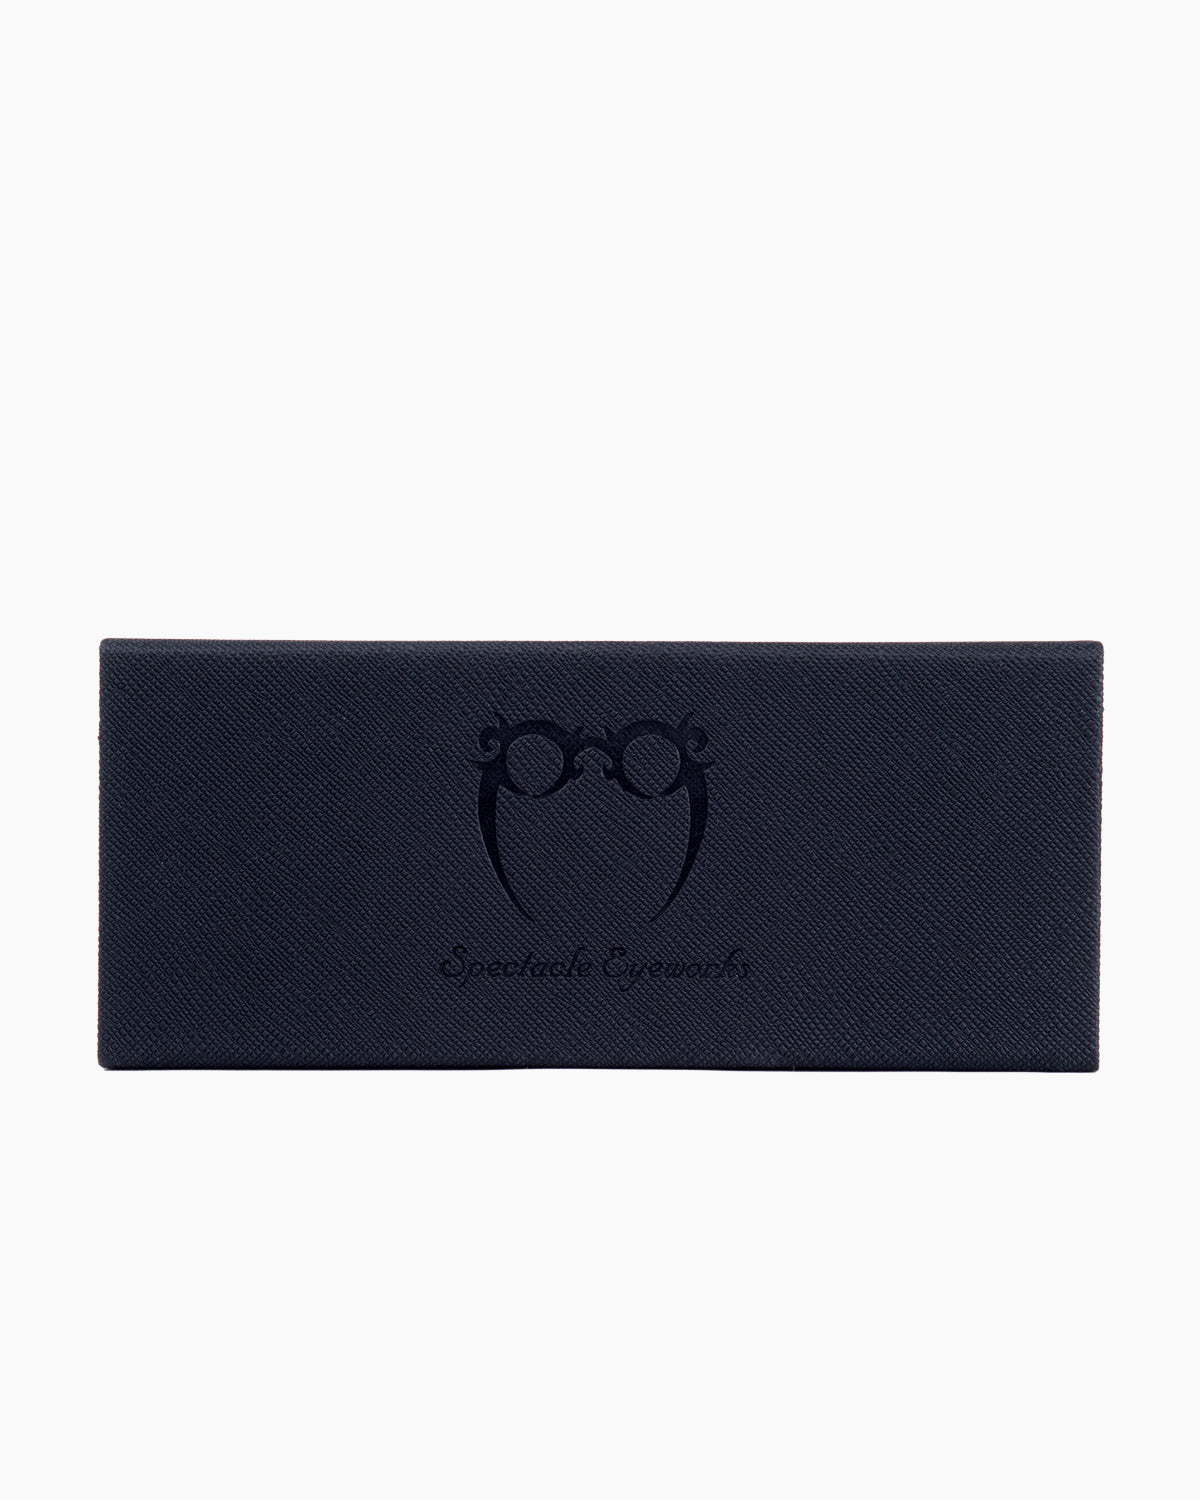 Spectacleeyeworks - Wendy - 306 | Bar à lunettes